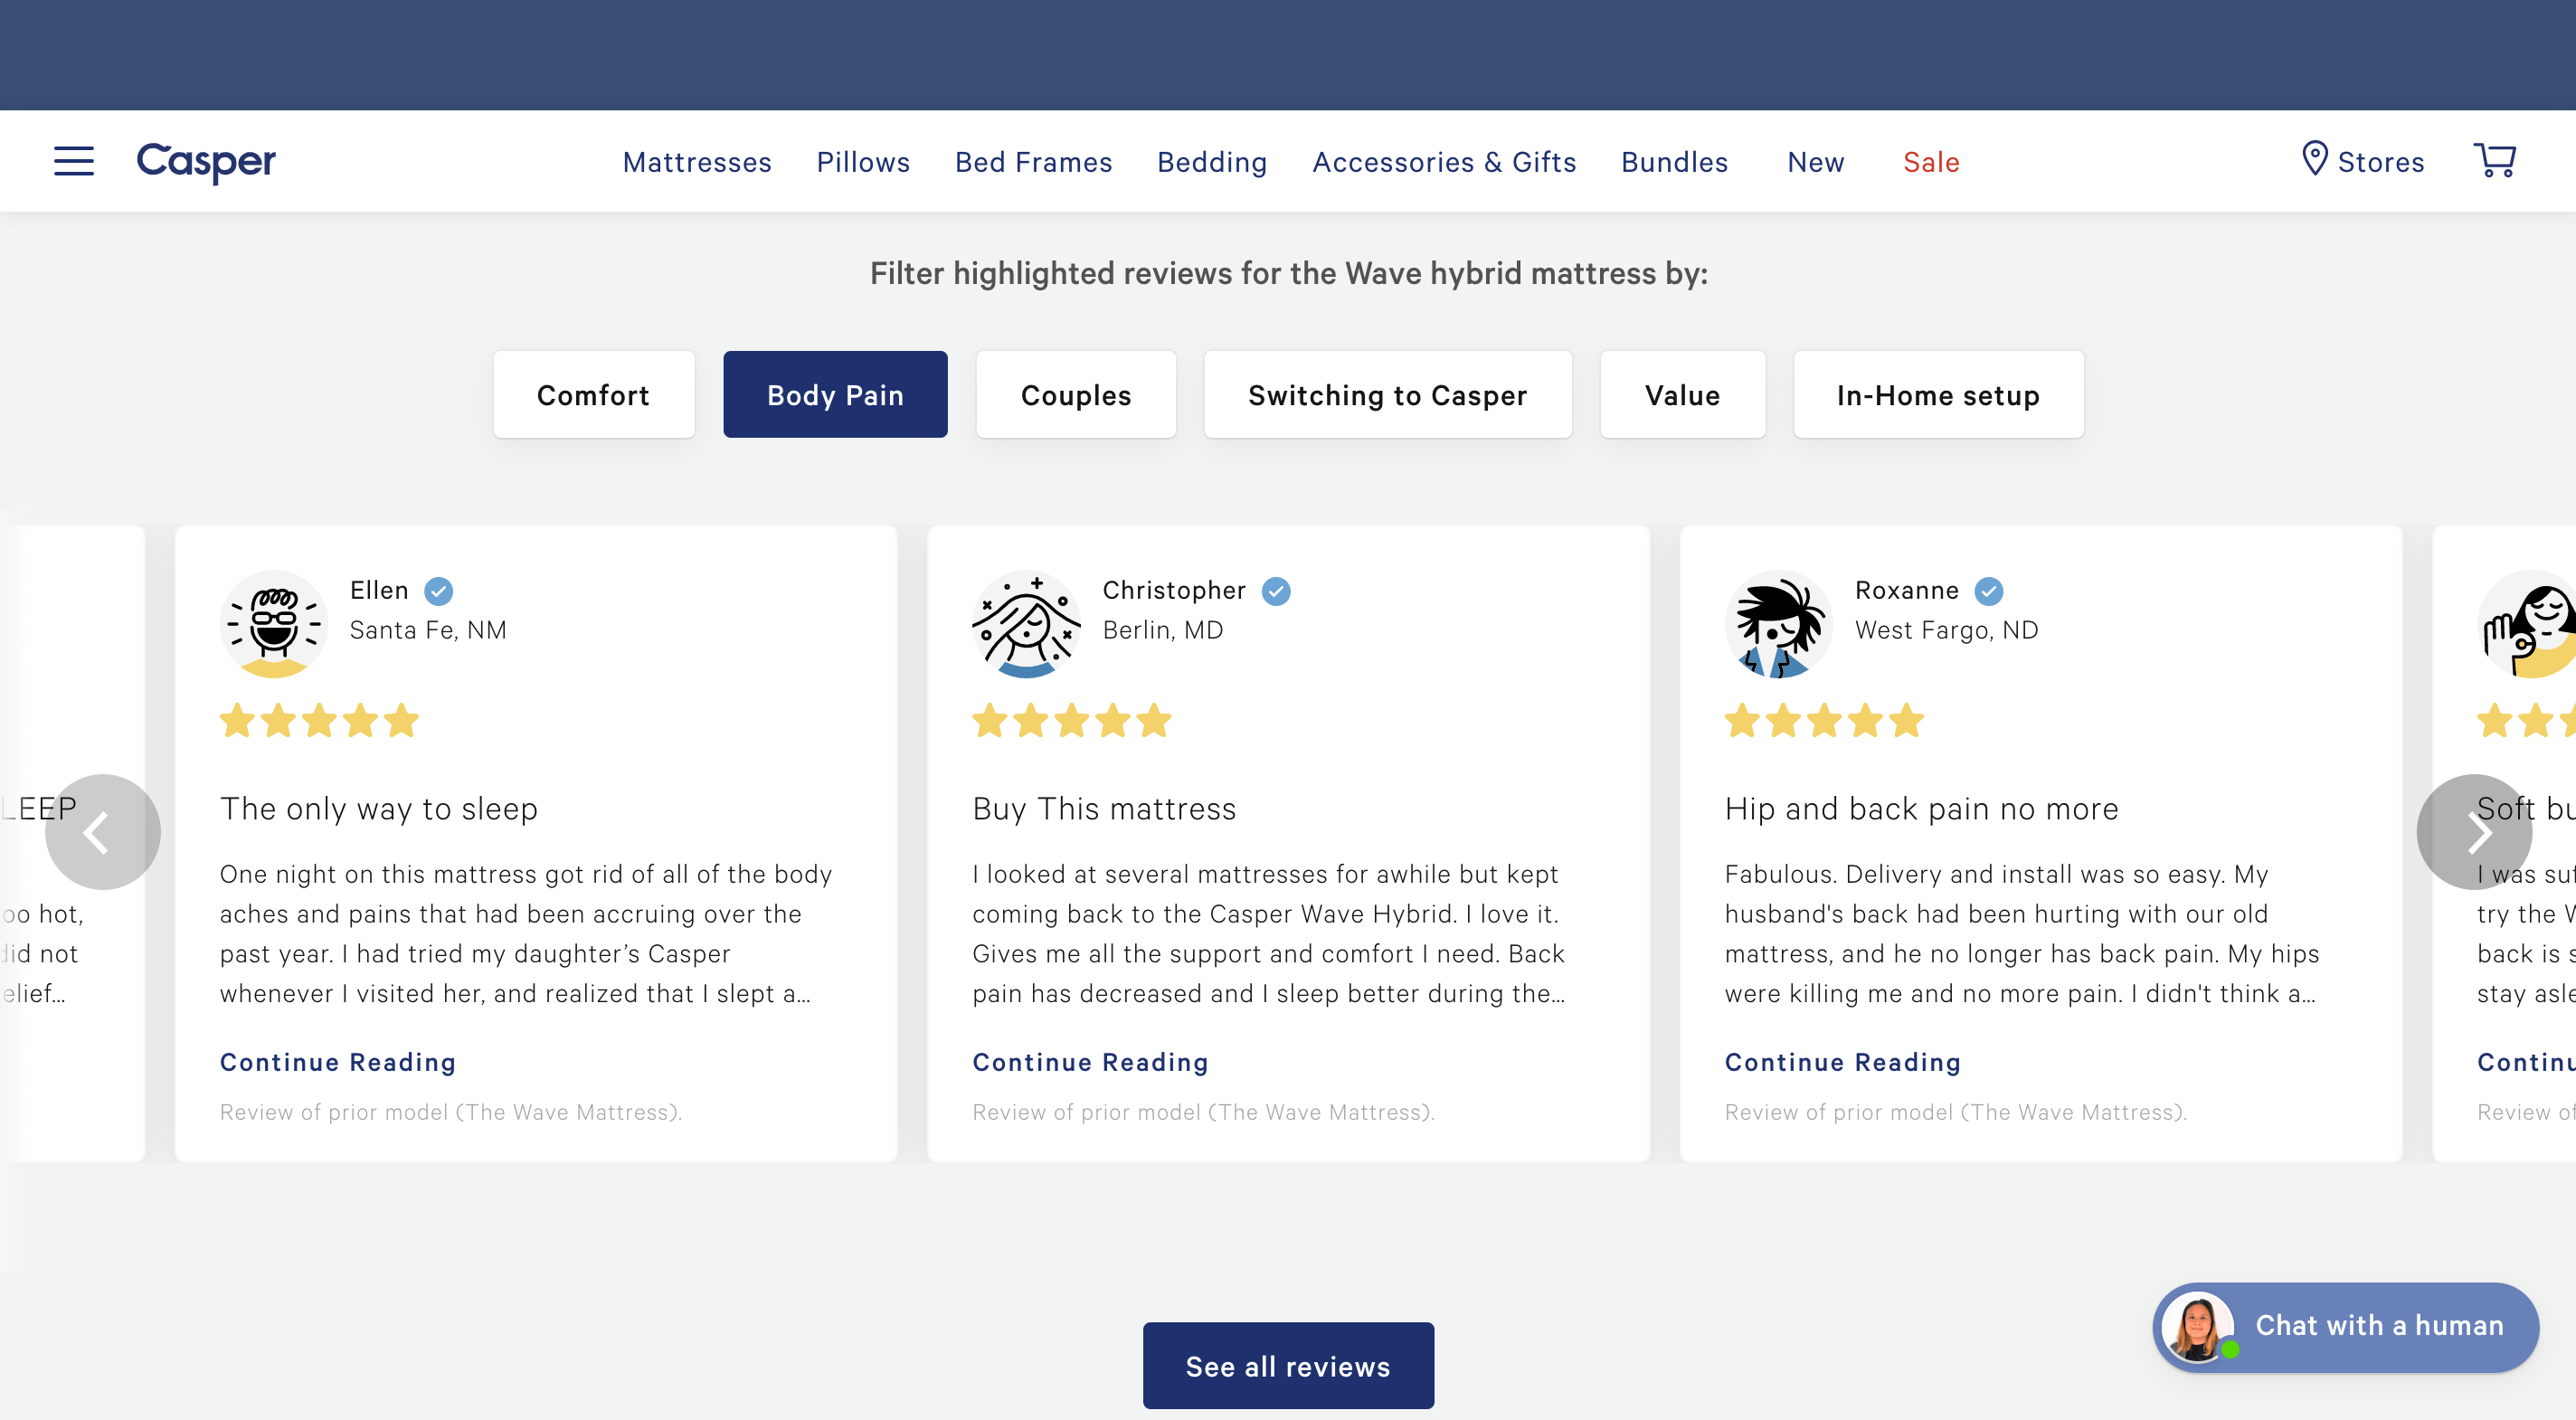 Key phrases in gray, rectangular cards above a horizontal carousel of review listings. 'Body Pain,' the second phrase from the left, is filled in blue